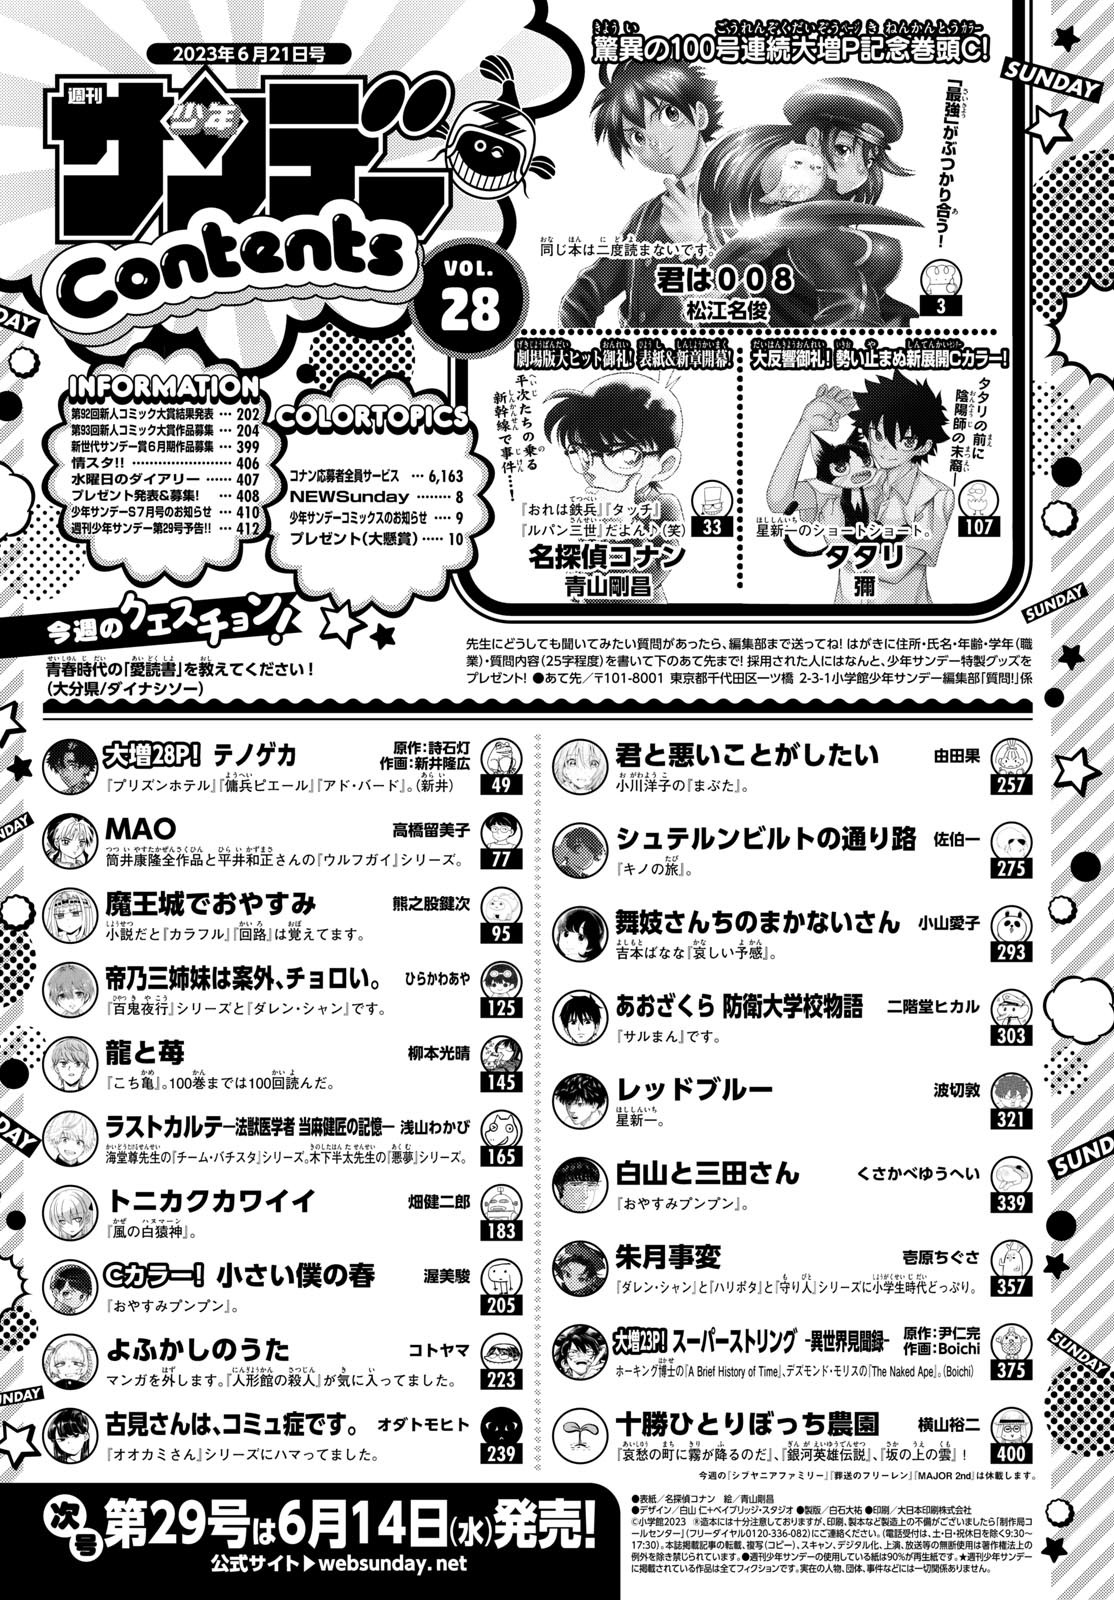 Weekly Shōnen Sunday - 週刊少年サンデー - Chapter 2023-28 - Page 409